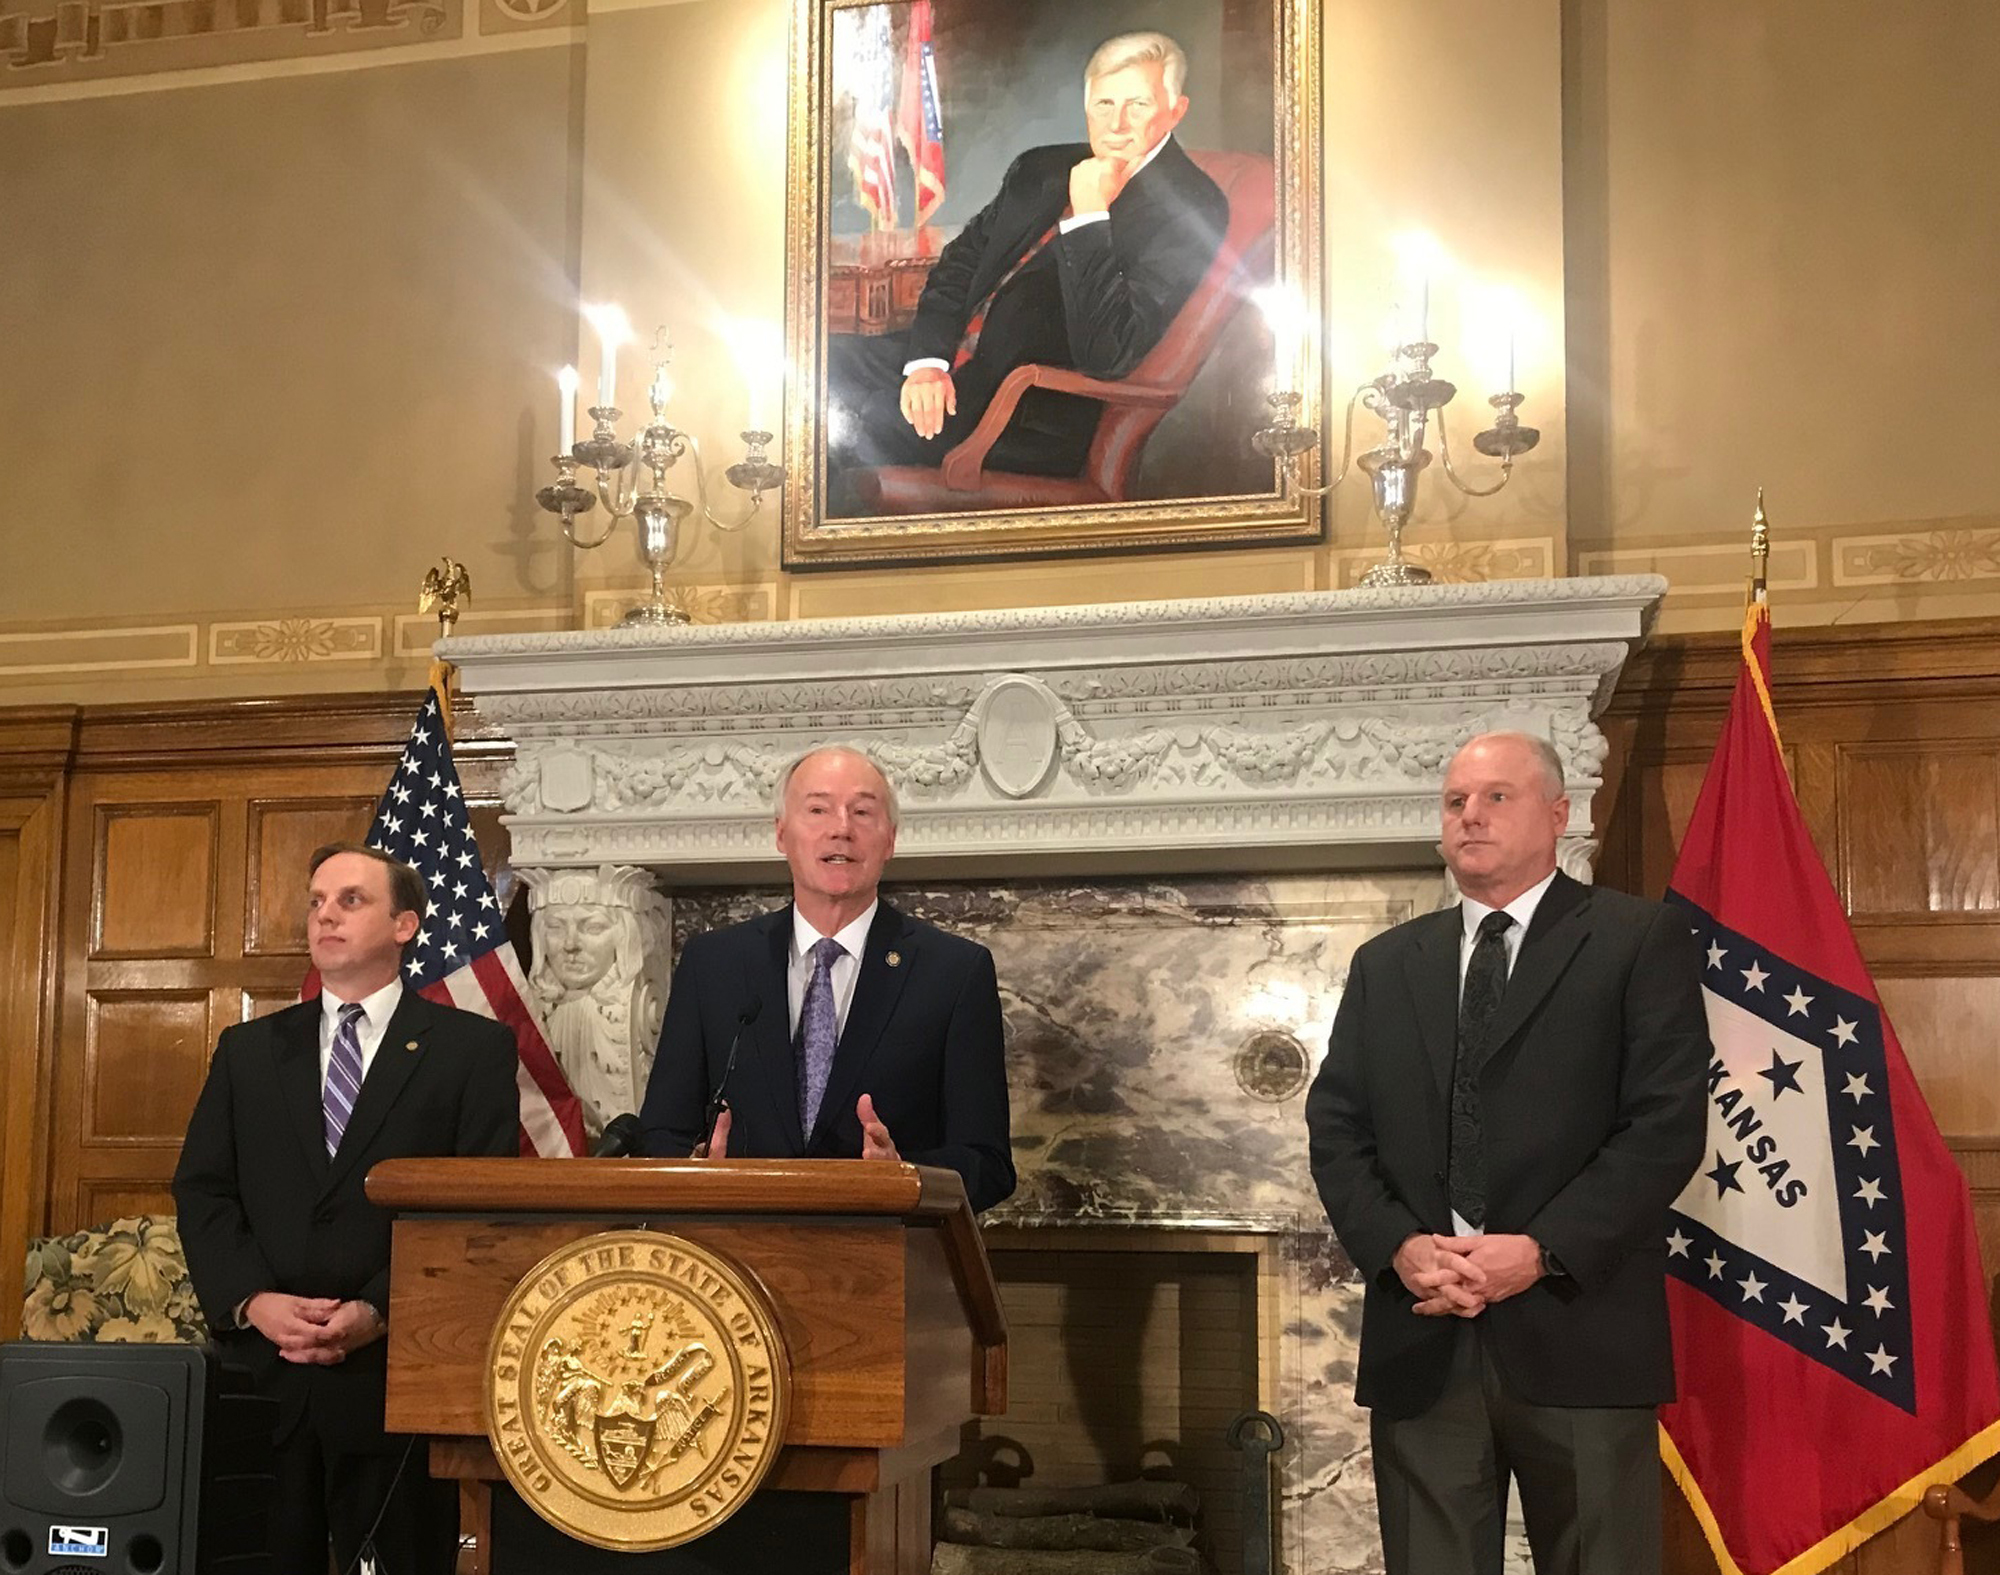 Arkansas Gov. Asa Hutchinson speaks at a news conference about a ruling against the state's work requirement for its Medicaid expansion program at the state Capitol in Little Rock, Ark. on March 28, 2019. (Andrew DeMillo—AP)